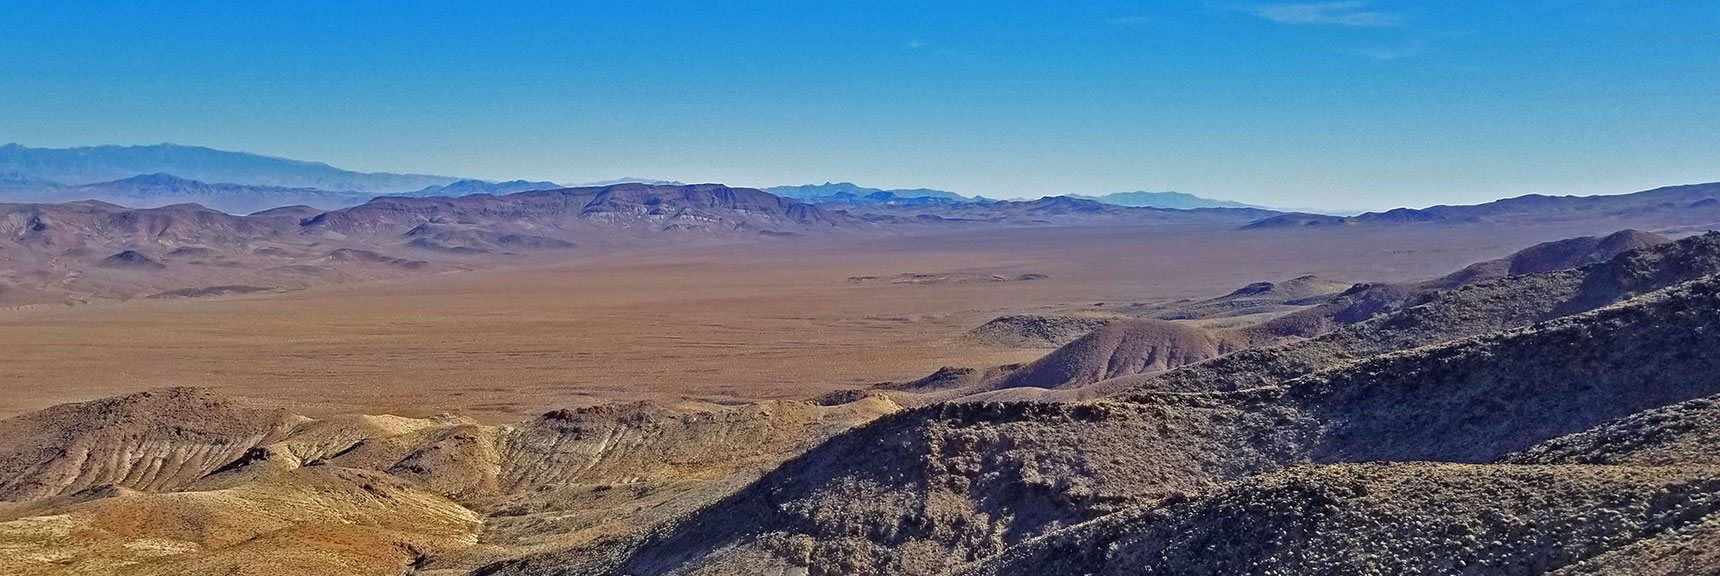 Southeastern View of the Valley East of Dante's Ridge | Dante's View to Mt. Perry | Death Valley National Park, CA